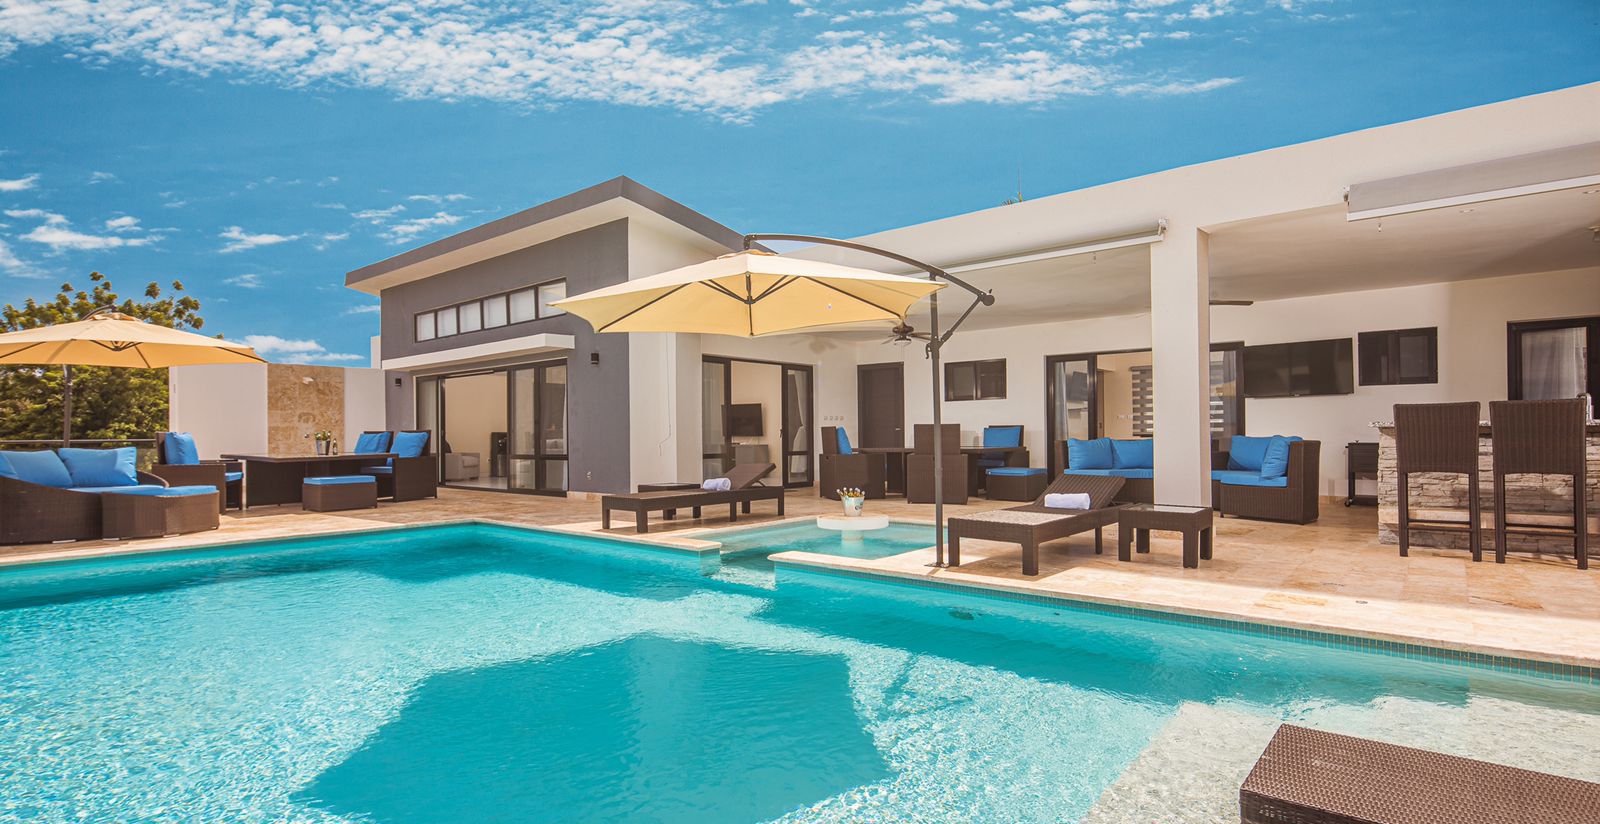 Hidden Costs of Buying a Private Villa in the Dominican Republic: Part 2